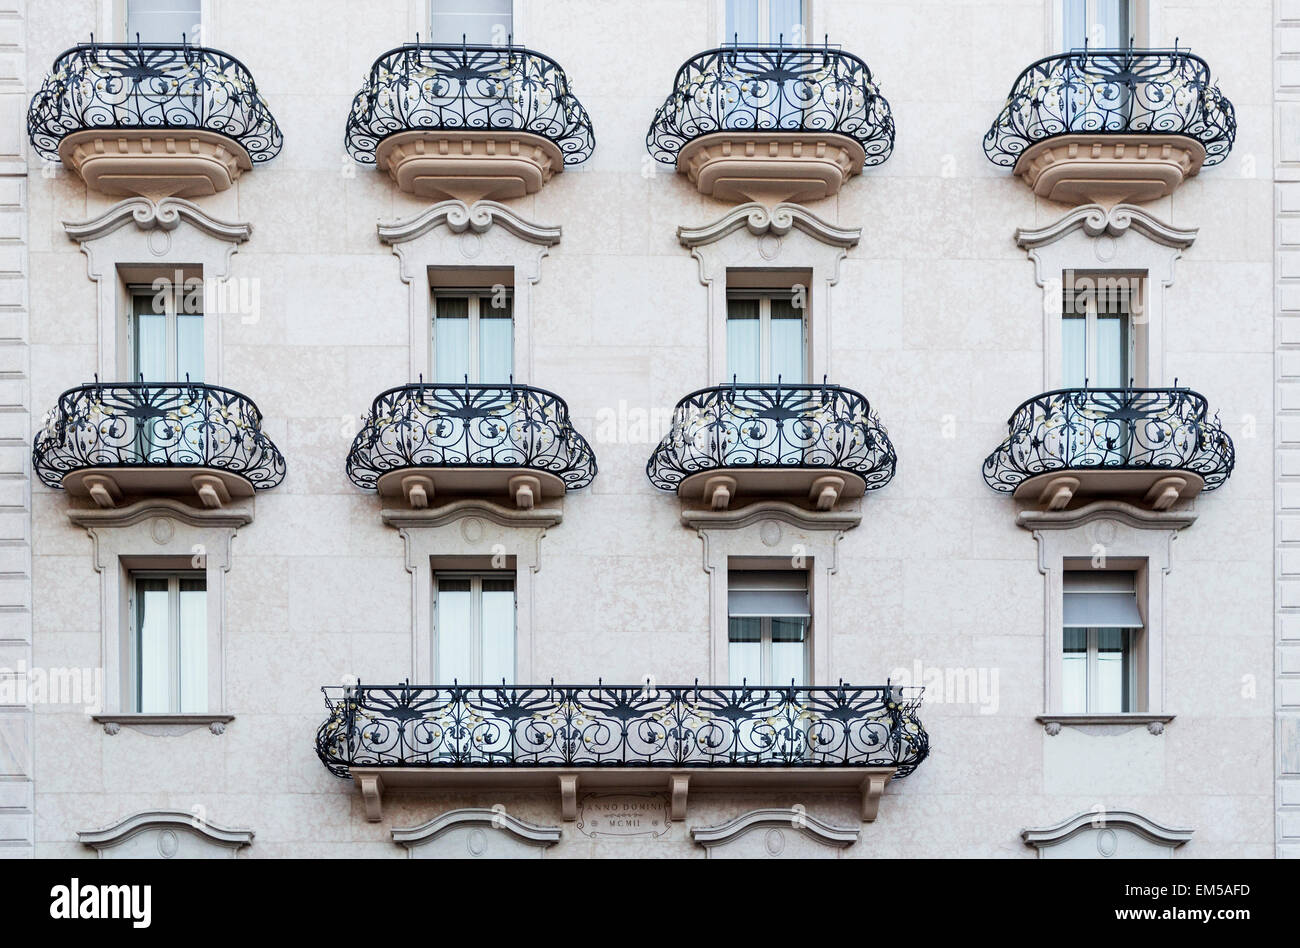 balconies and windows on the facade of a building Stock Photo